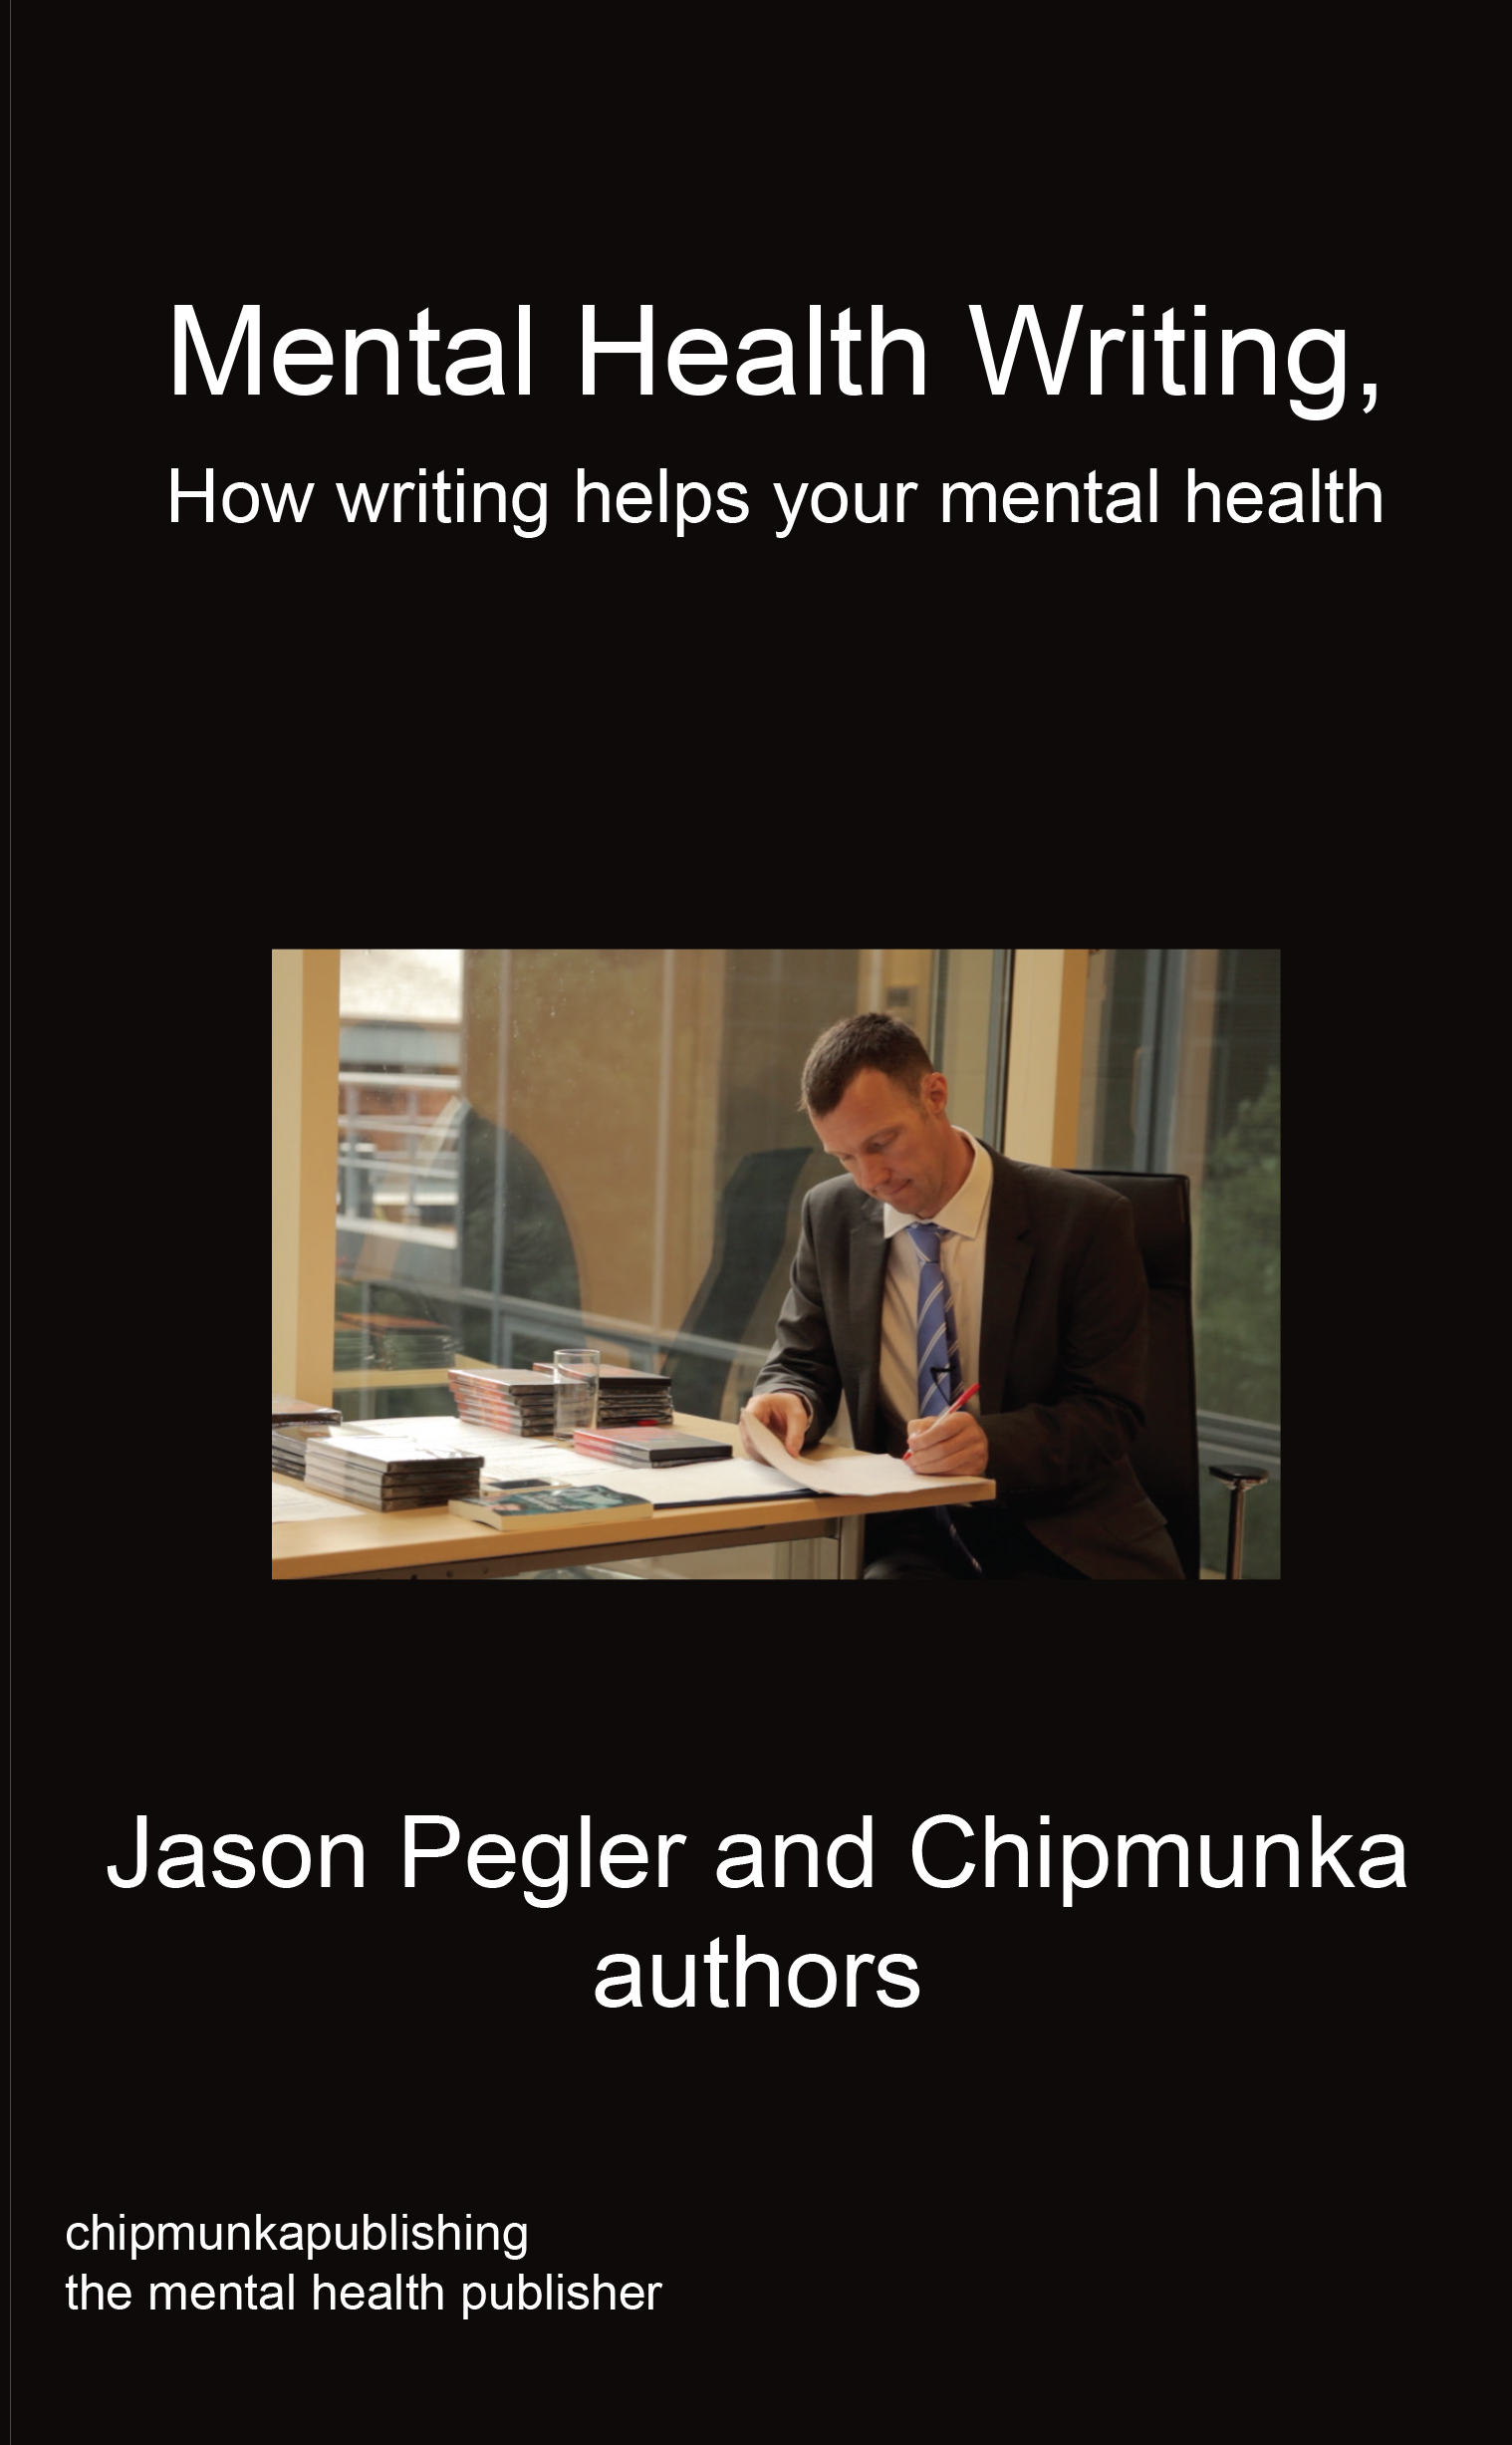 Mental Health Writing: How writing helps your mental health